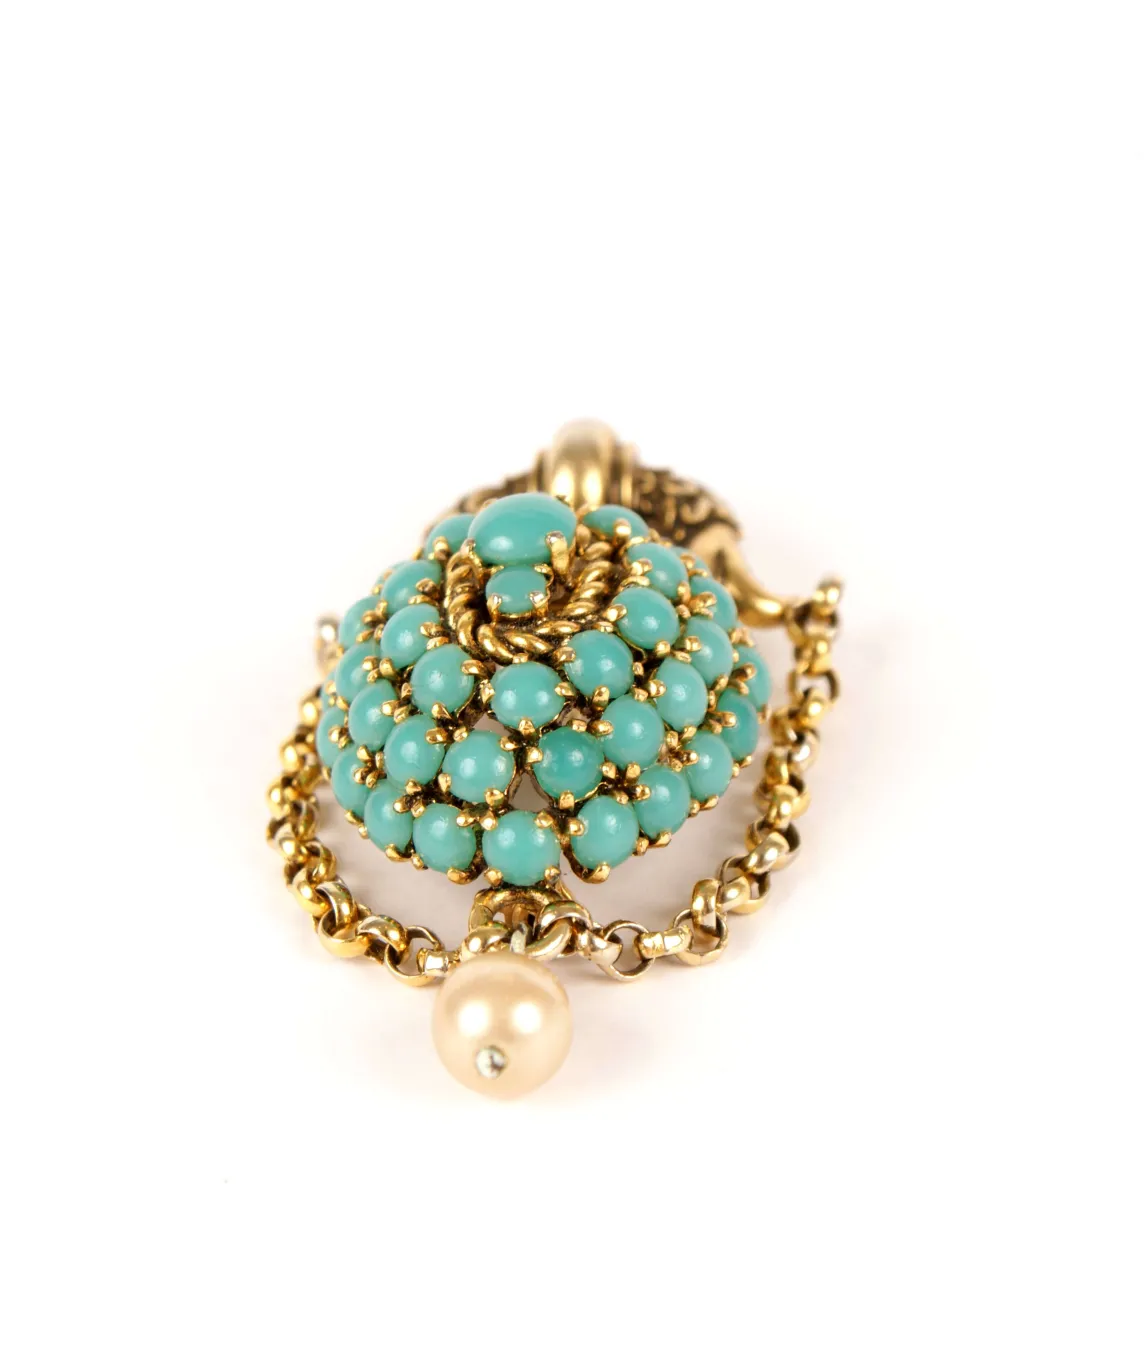 Turquoise Dior brooch with pearl